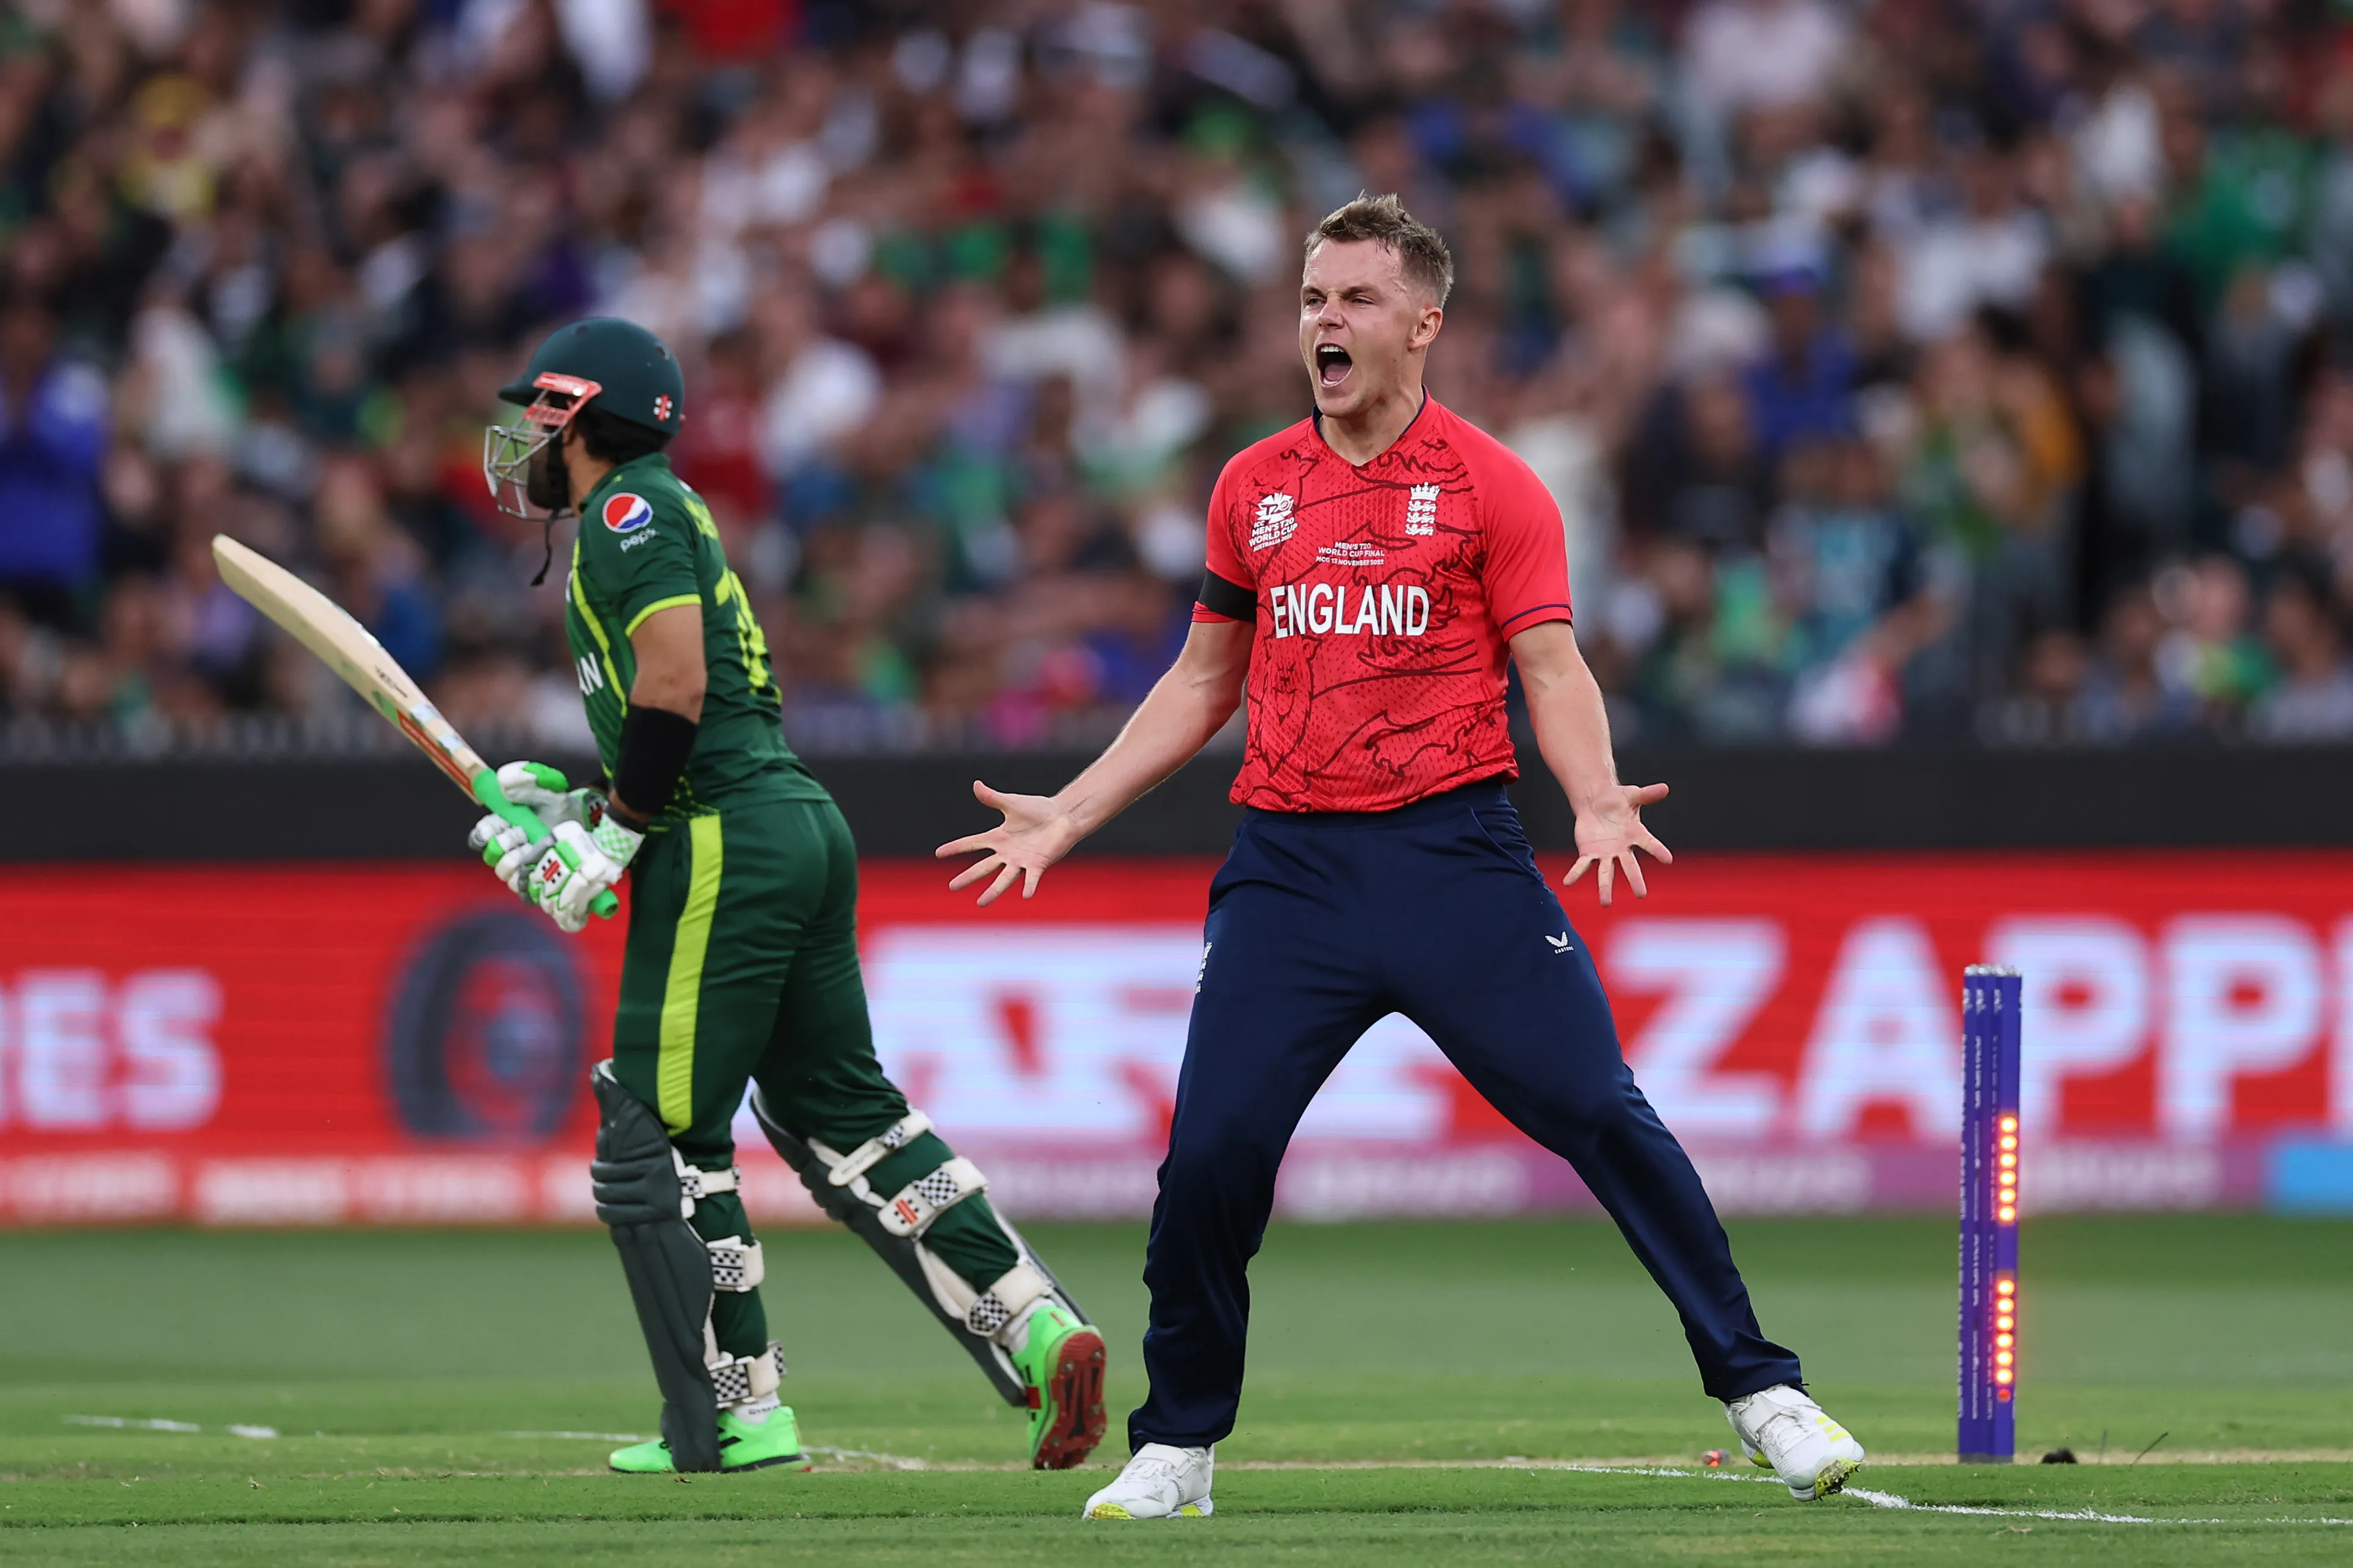 ICC World T20 | Twitter reacts as Sam Curran, Ben Stokes guide England to double World Cup triumph